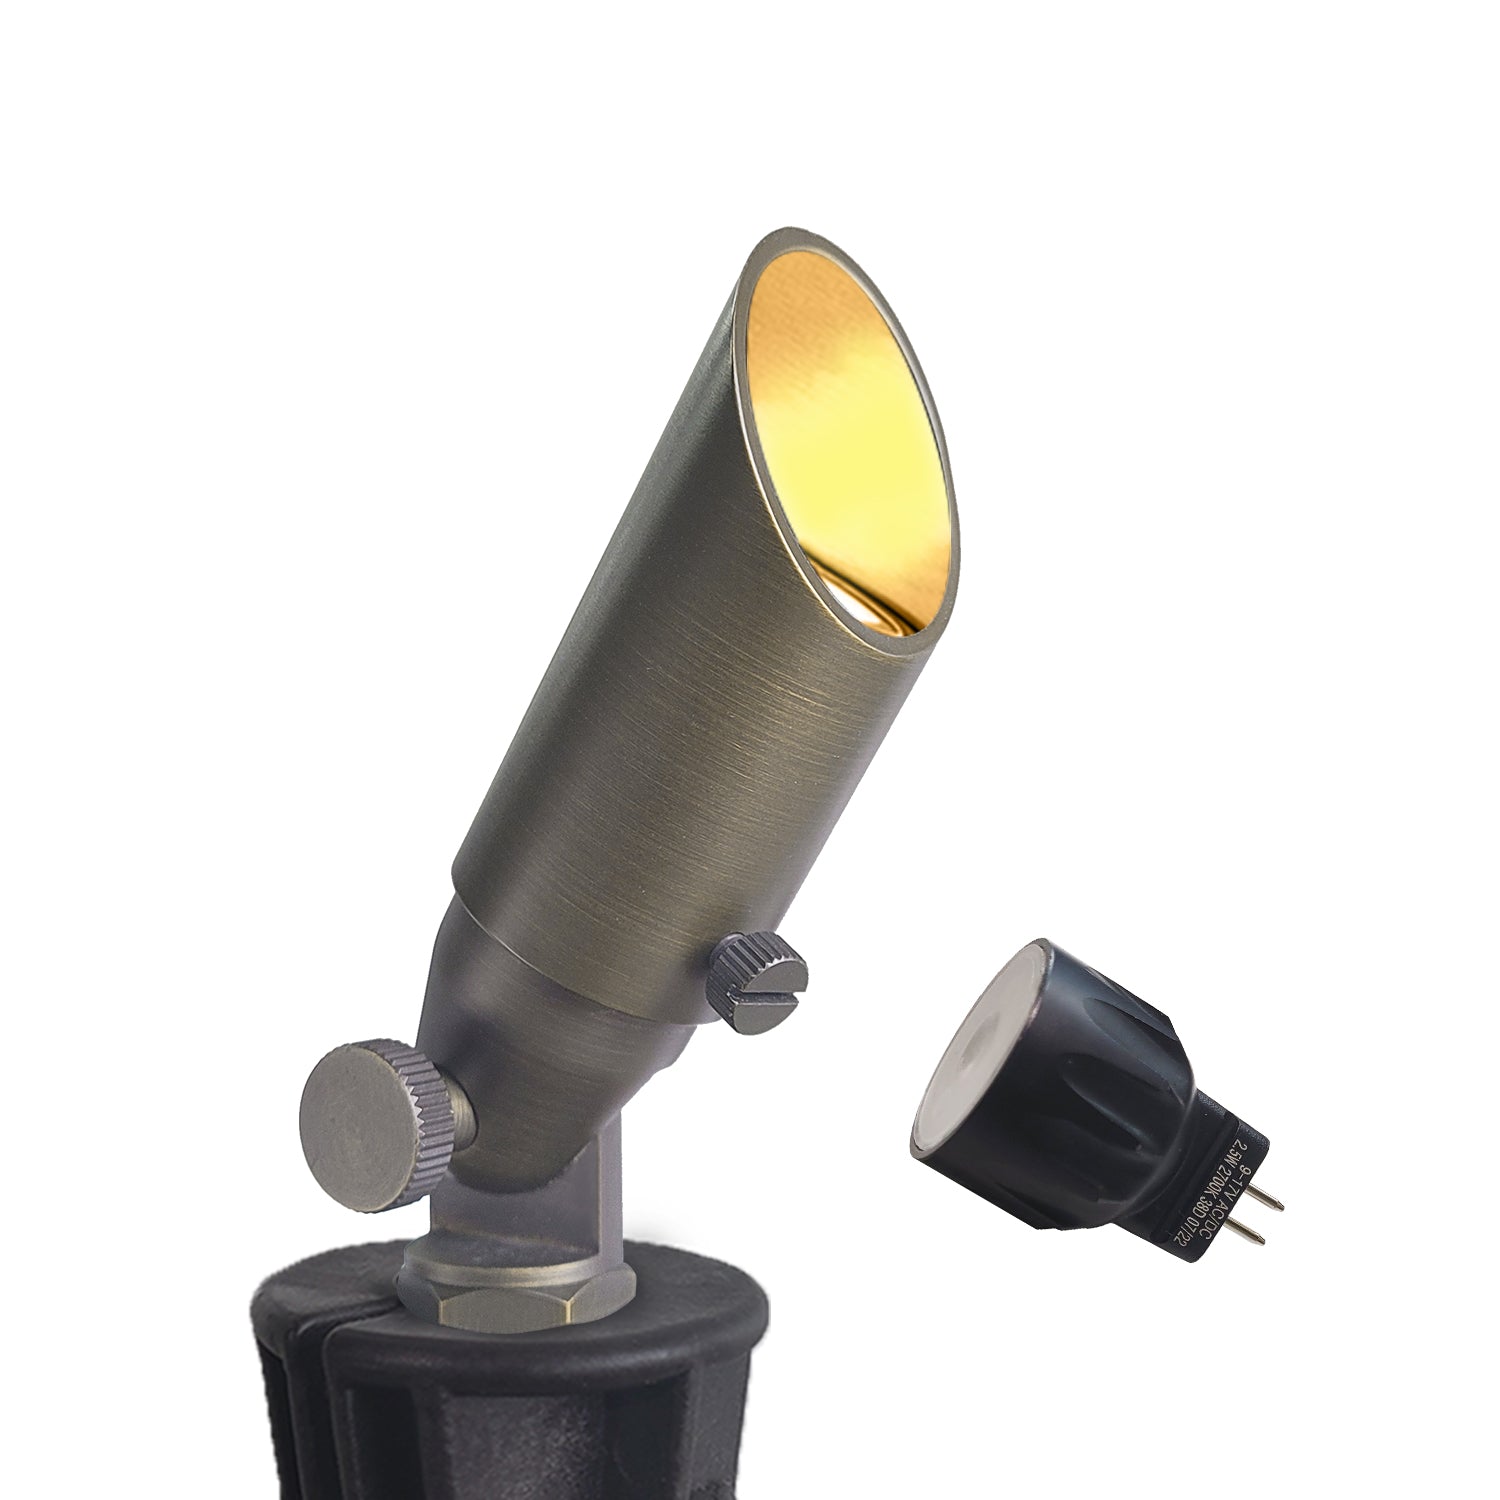 Mini size low voltage brass outdoor spotlight with adjustable angle and ground spike for garden lighting COA104B